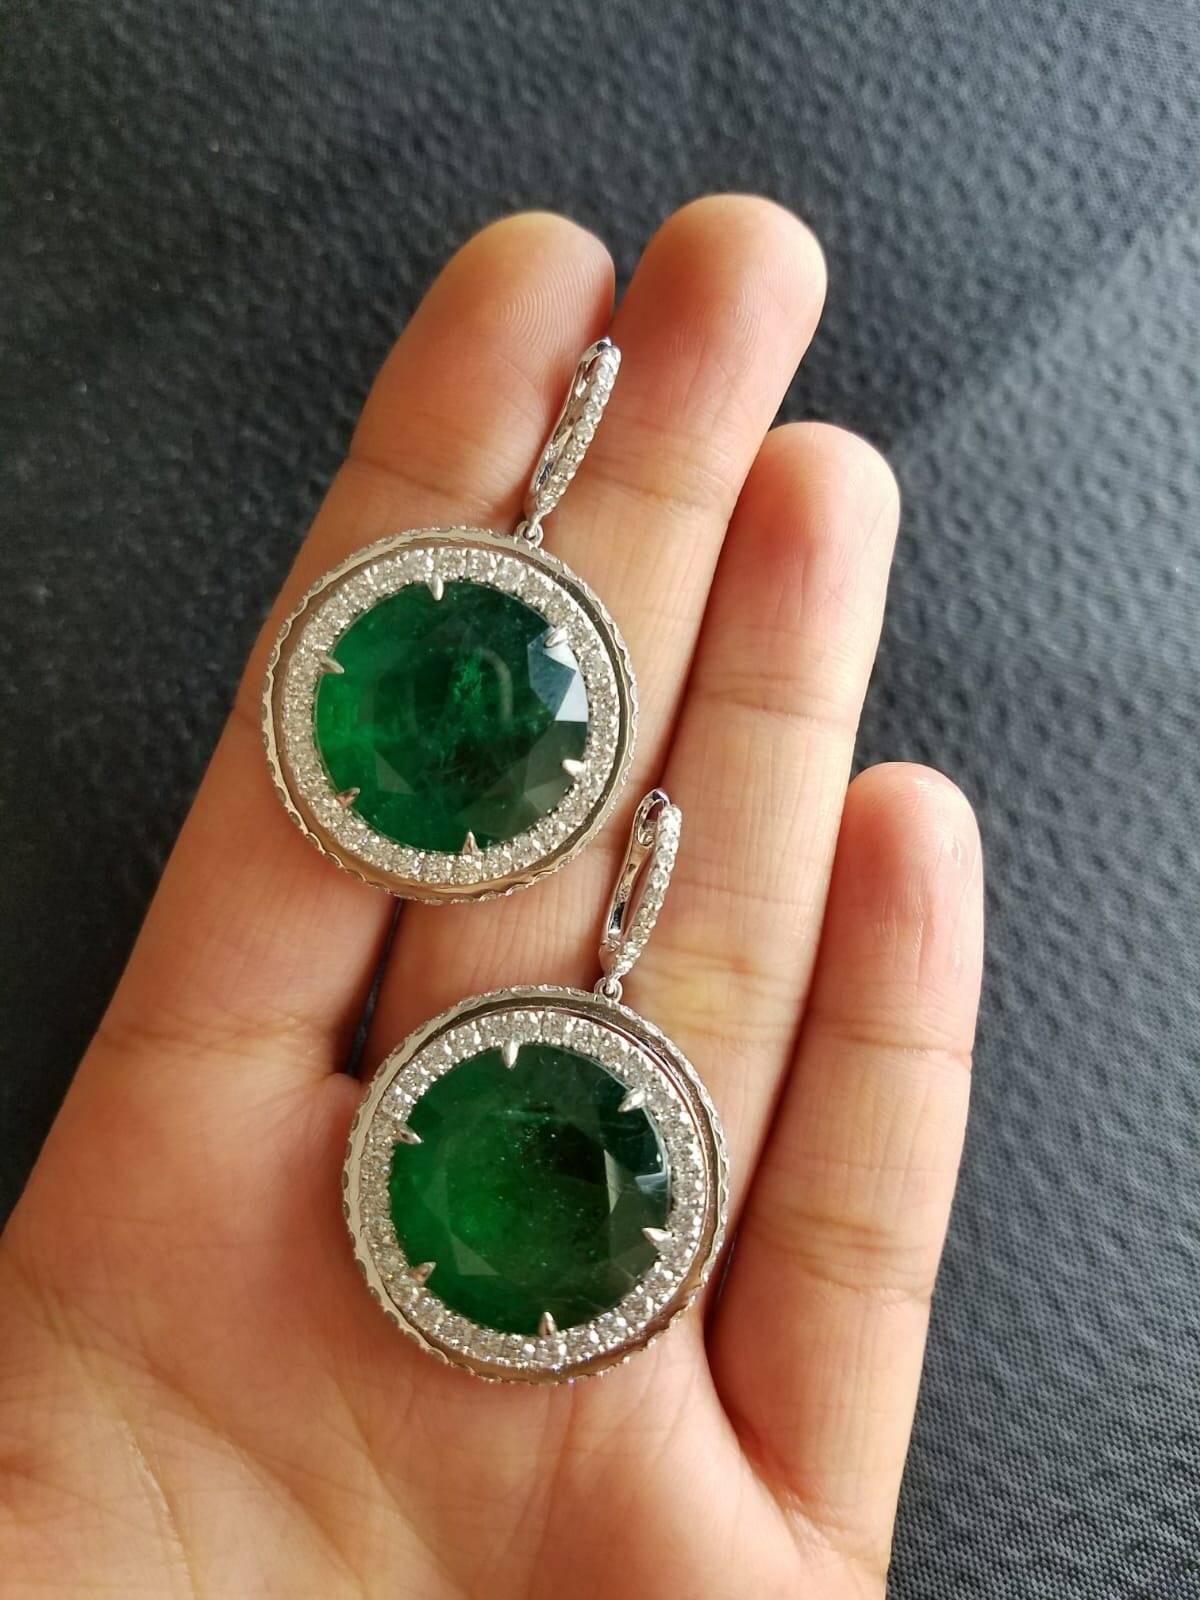 A very unique pair of statement dangling earrings, using high-quality round-shape (rare to find) Zambian Emeralds and Diamonds, all set in 18K white gold. 

Material Details:

Stone: Zambian Emerald
Weight: 39.53 carats
Shape: